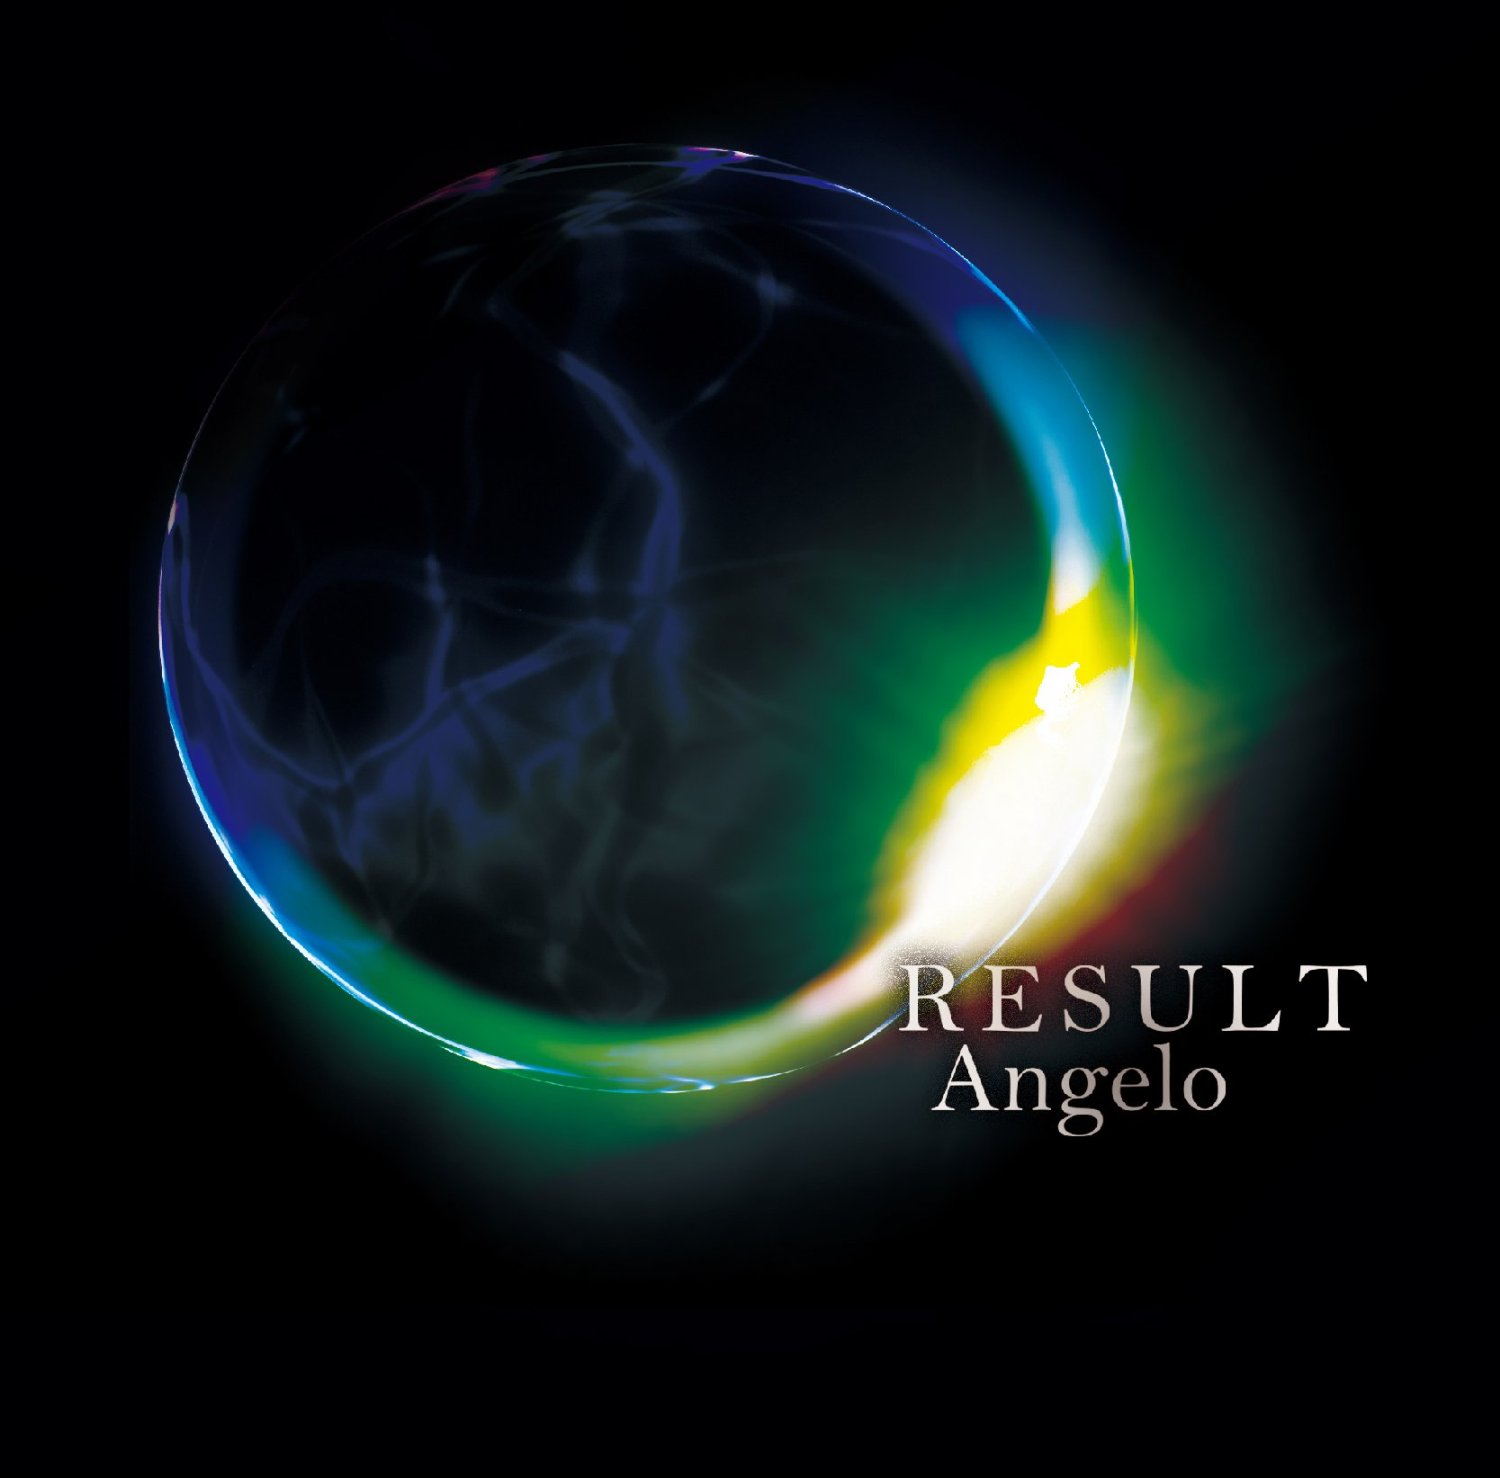 Angelo/RESULT